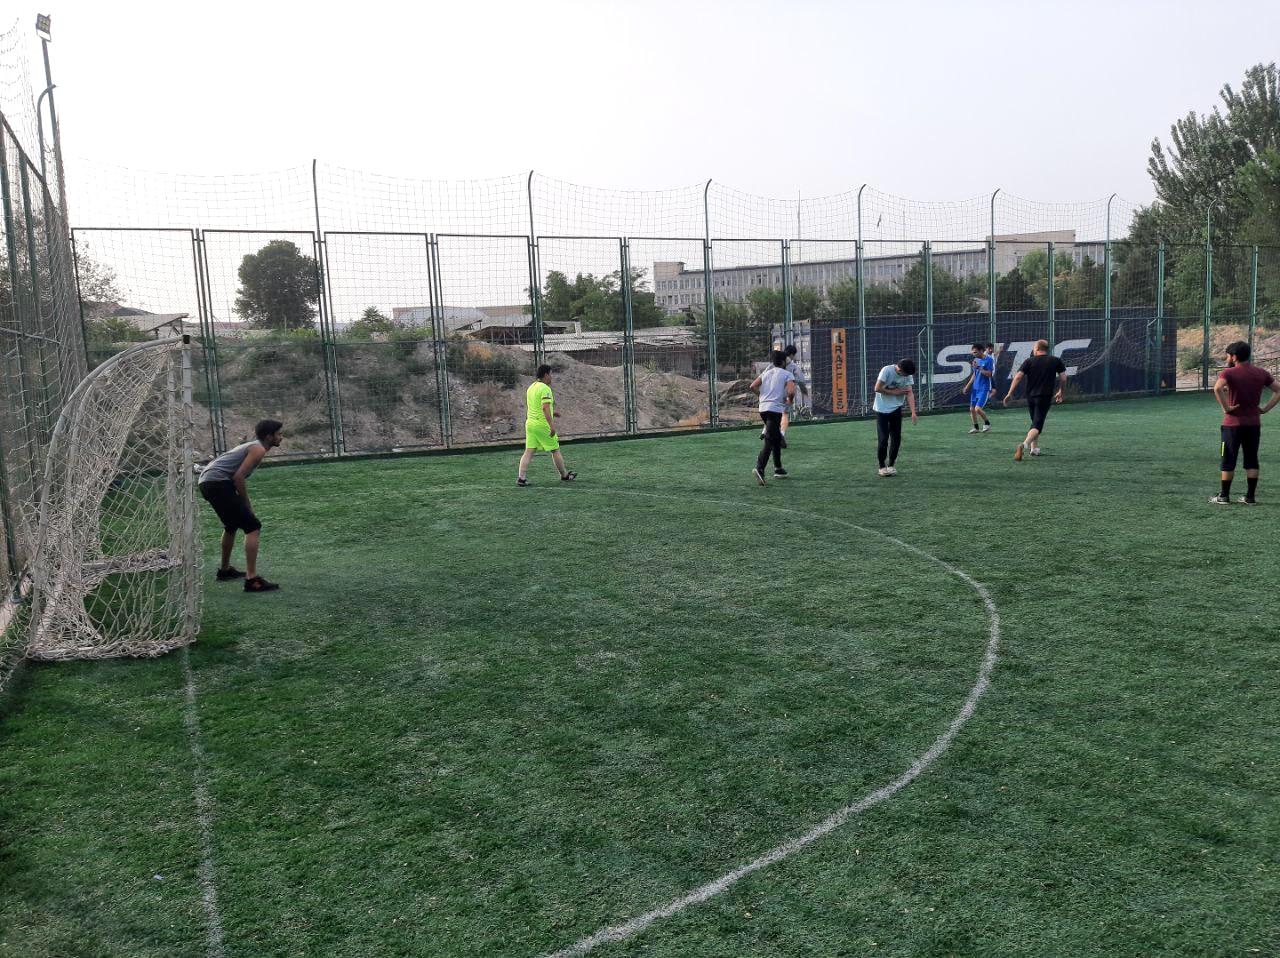 FOREIGN STUDENTS AND EMPLOYEES PLAYED MINI-FOOTBALL